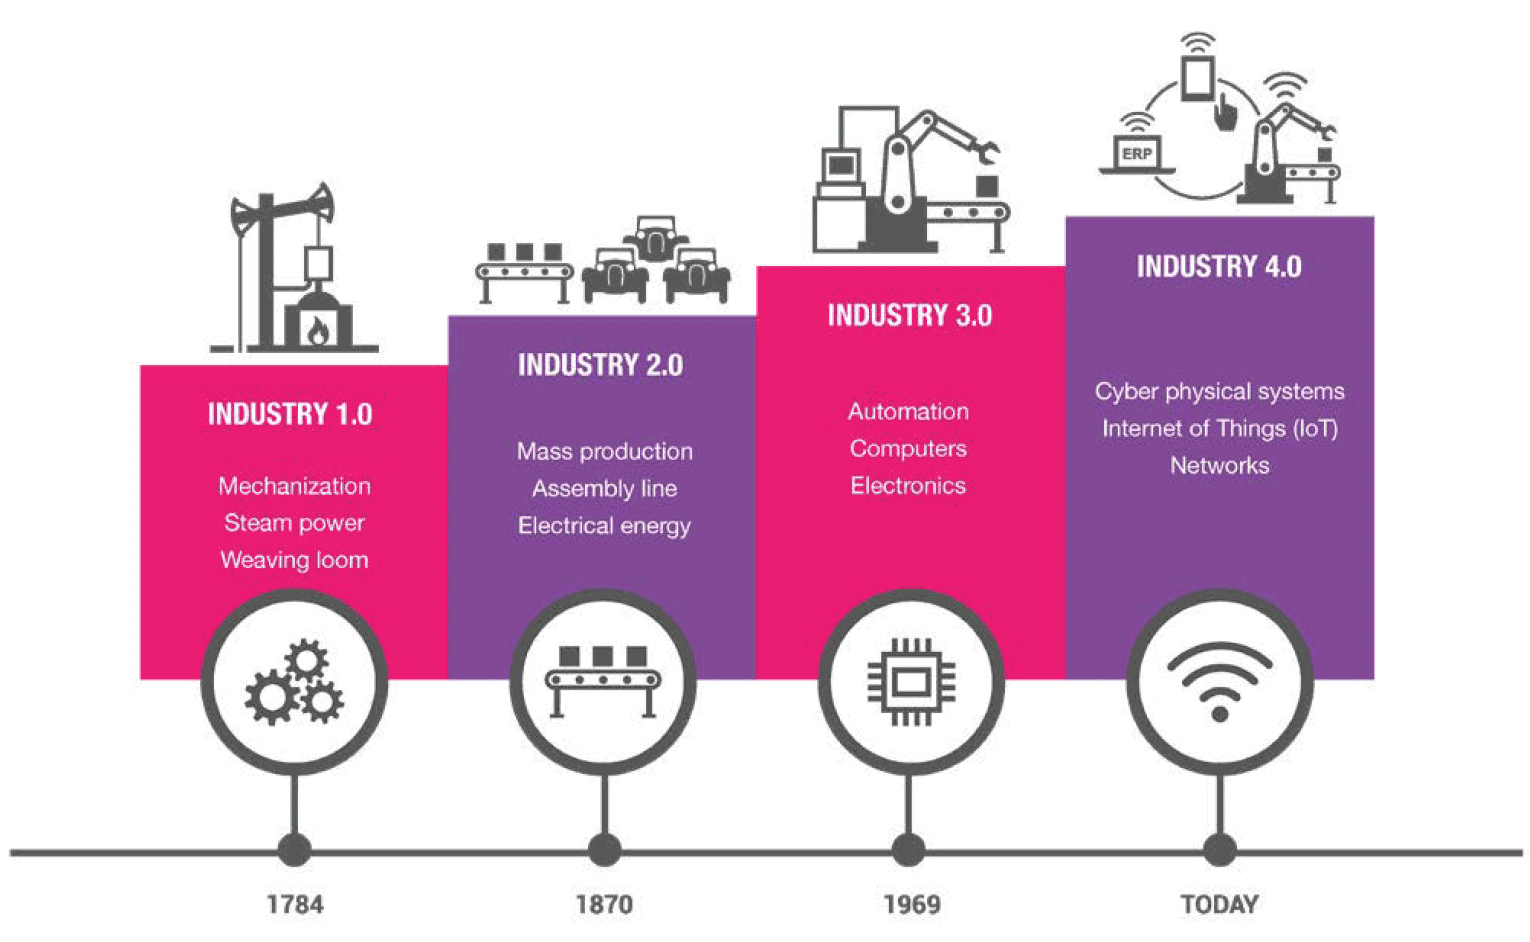 Timeline of the industrial revolution, commencing 1784 to present day, showing the progress made from mechanisation, to mass production, to automation to the digital age and the Internet of Things.